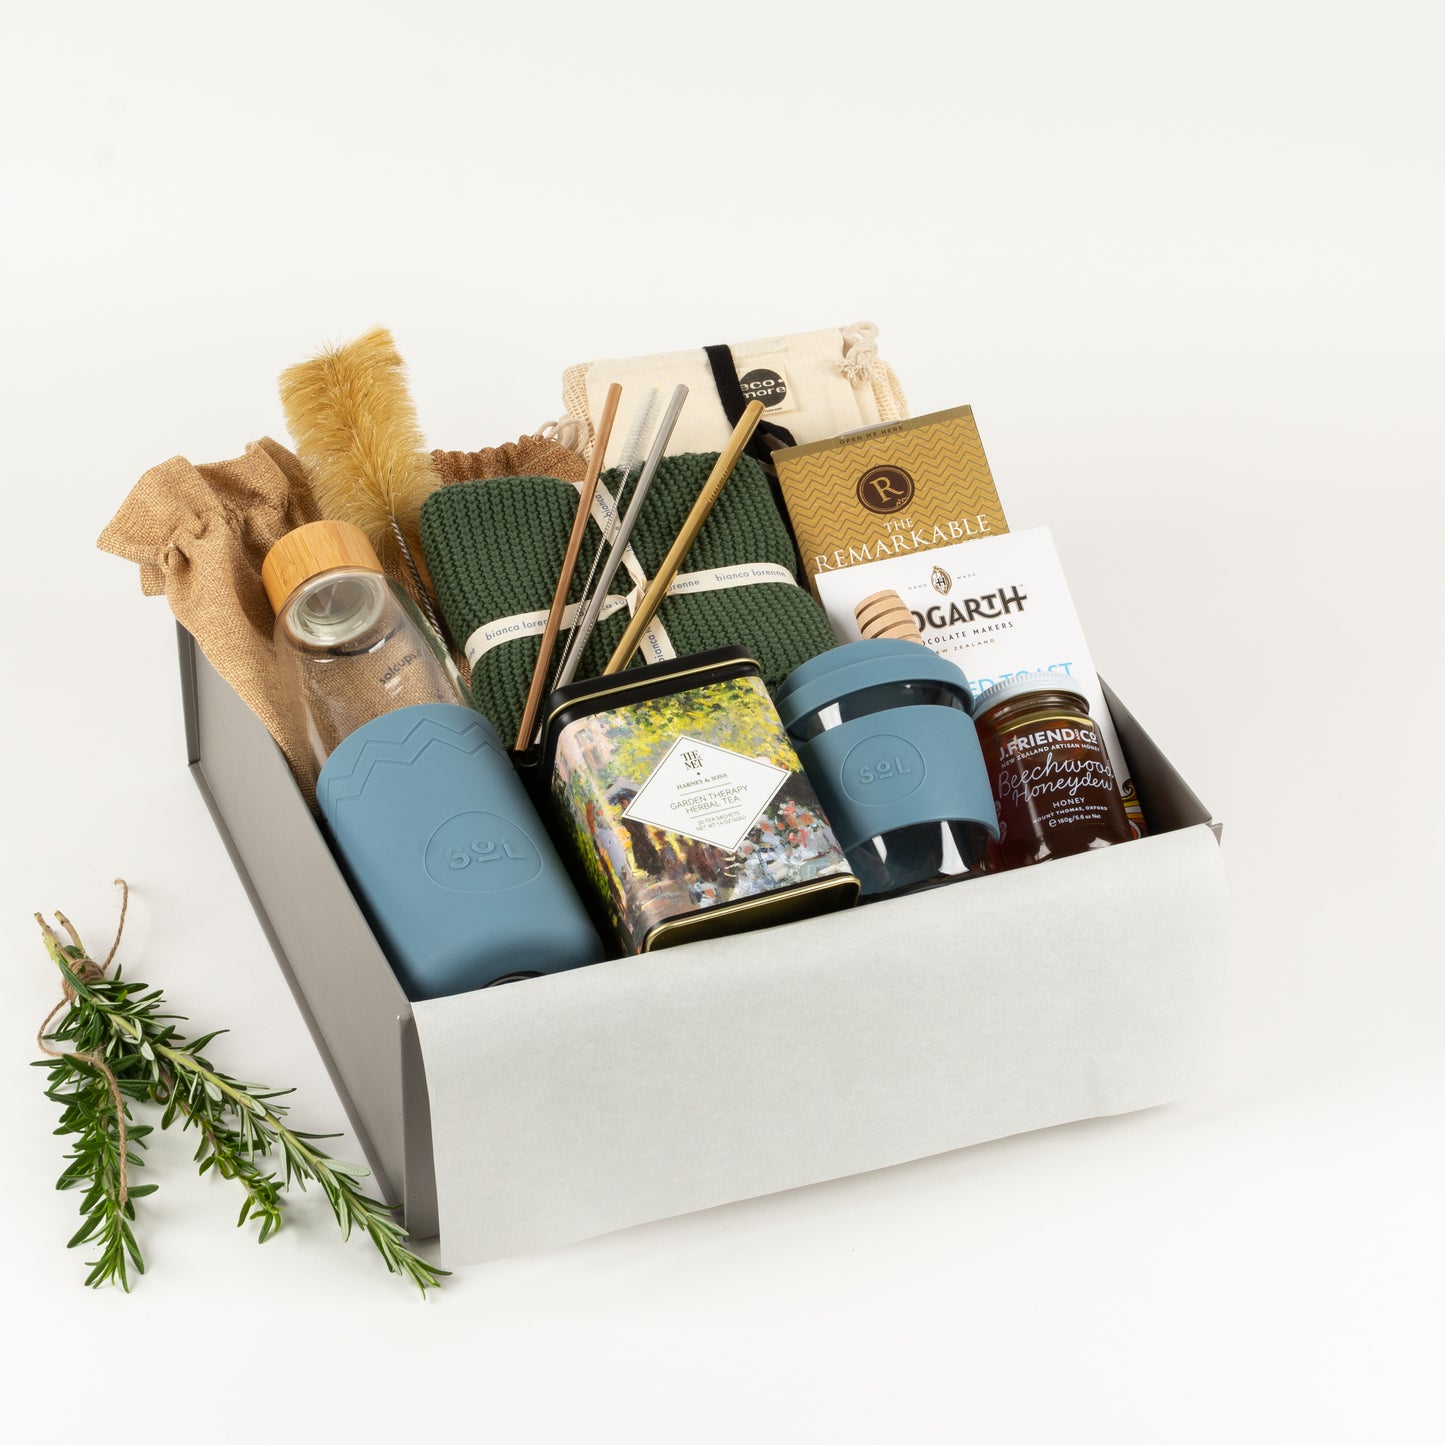 Eco Lovers Deluxe - Gift Boxes NZ - Gifts of Distinction.  Included is a set of organic cotton produce bags, cotton washers, reusable straws, drinking bottle and cup, herbal tea by Harney and sons, craft chocolate treats and artisan honey and dipper.